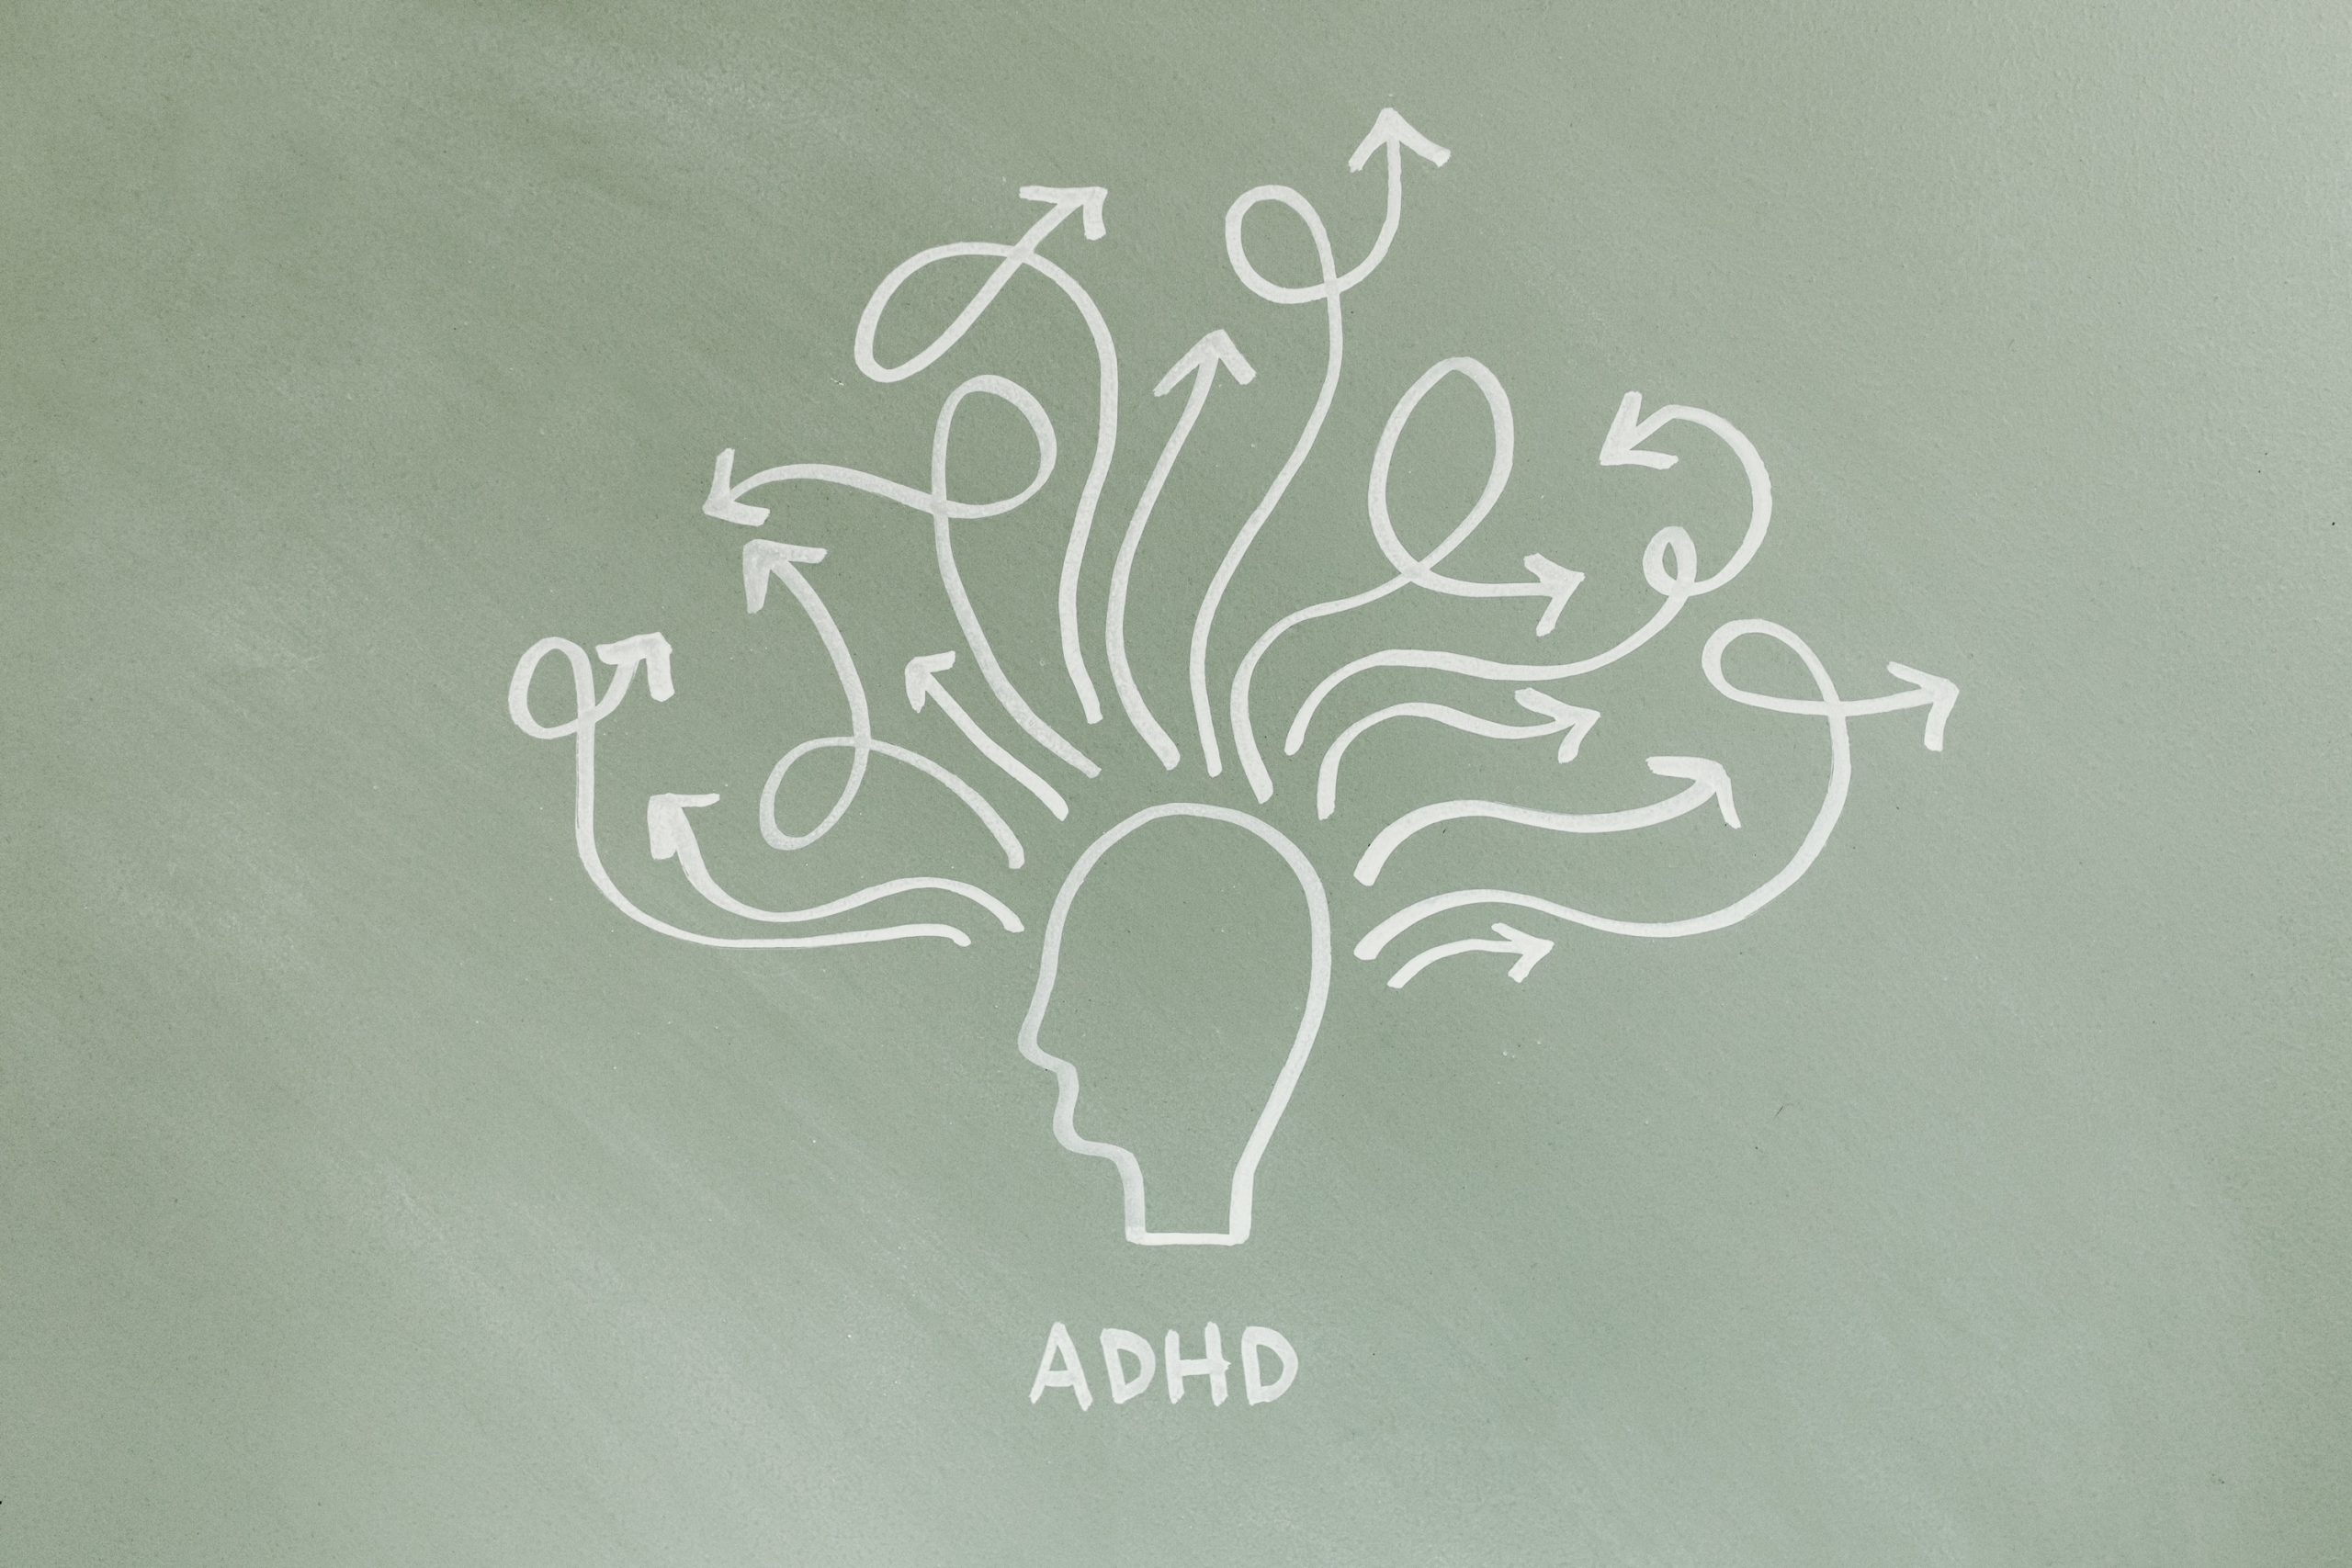 7 Tips + Tricks to Manage ADHD Without Medication